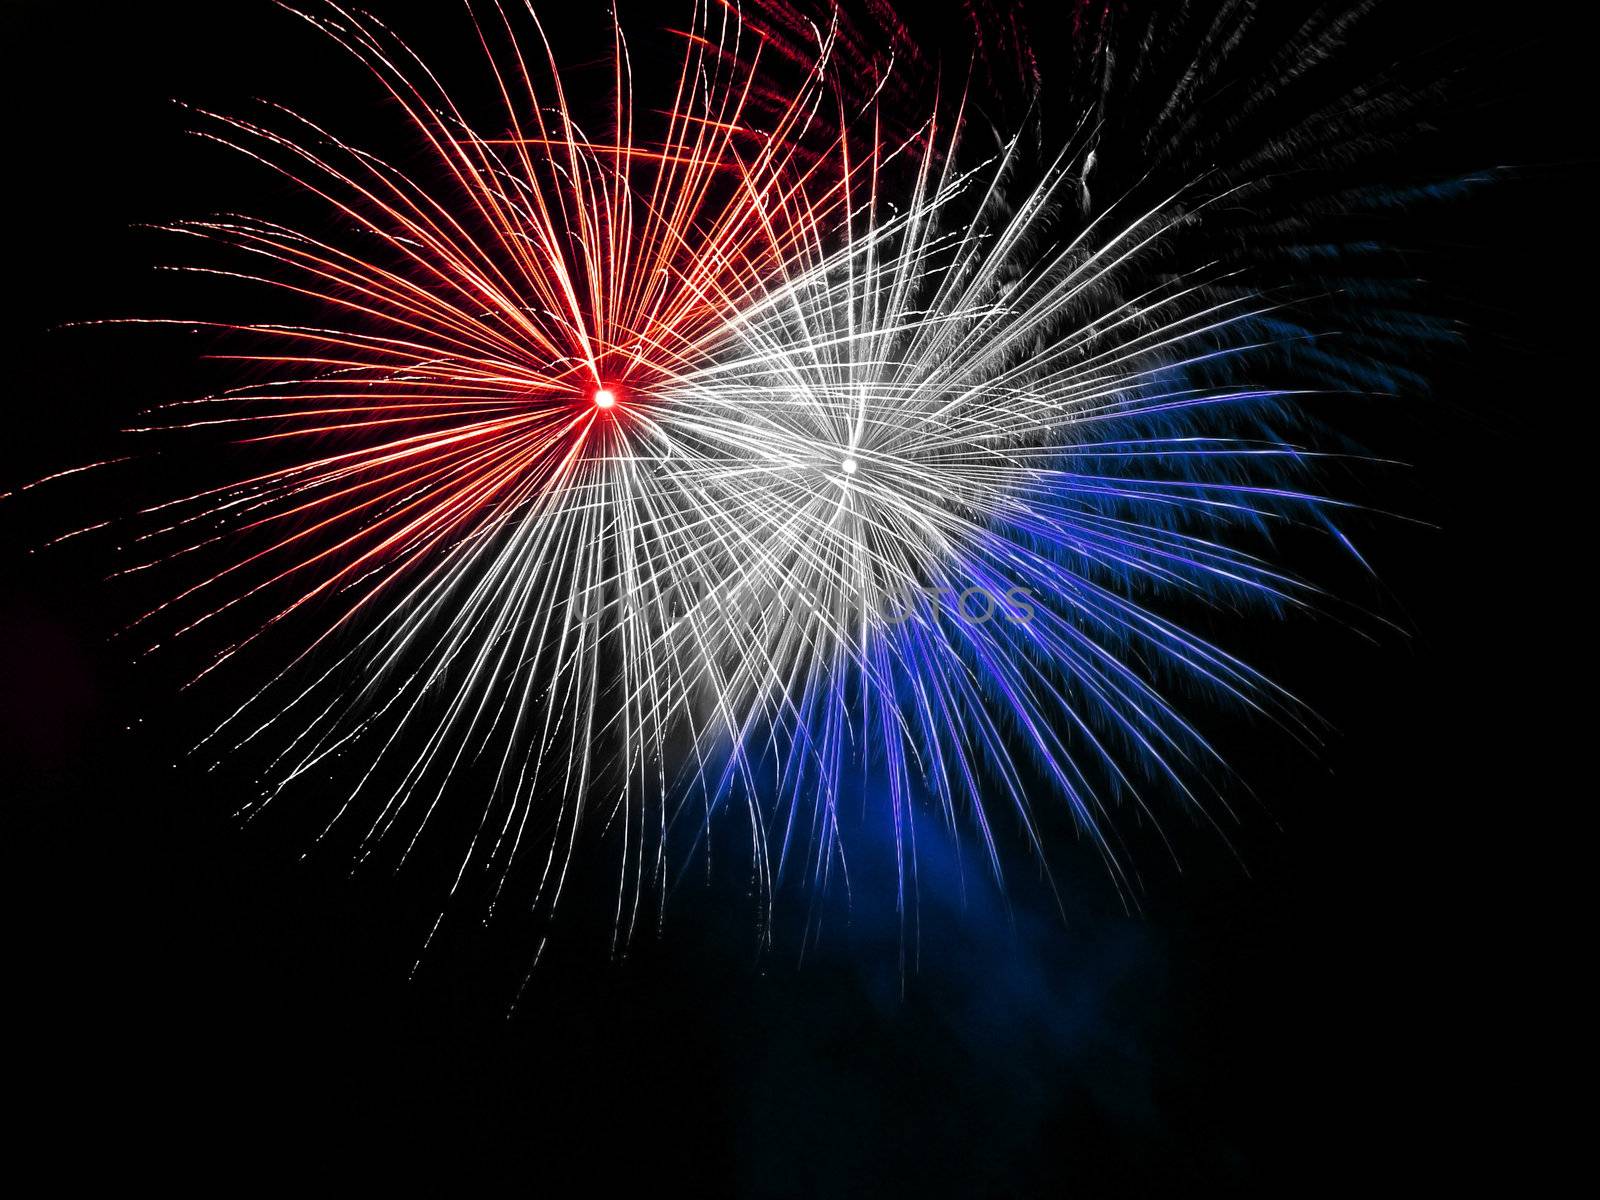 Long Exposure of Red White and Blue Fireworks Against a Black Sky